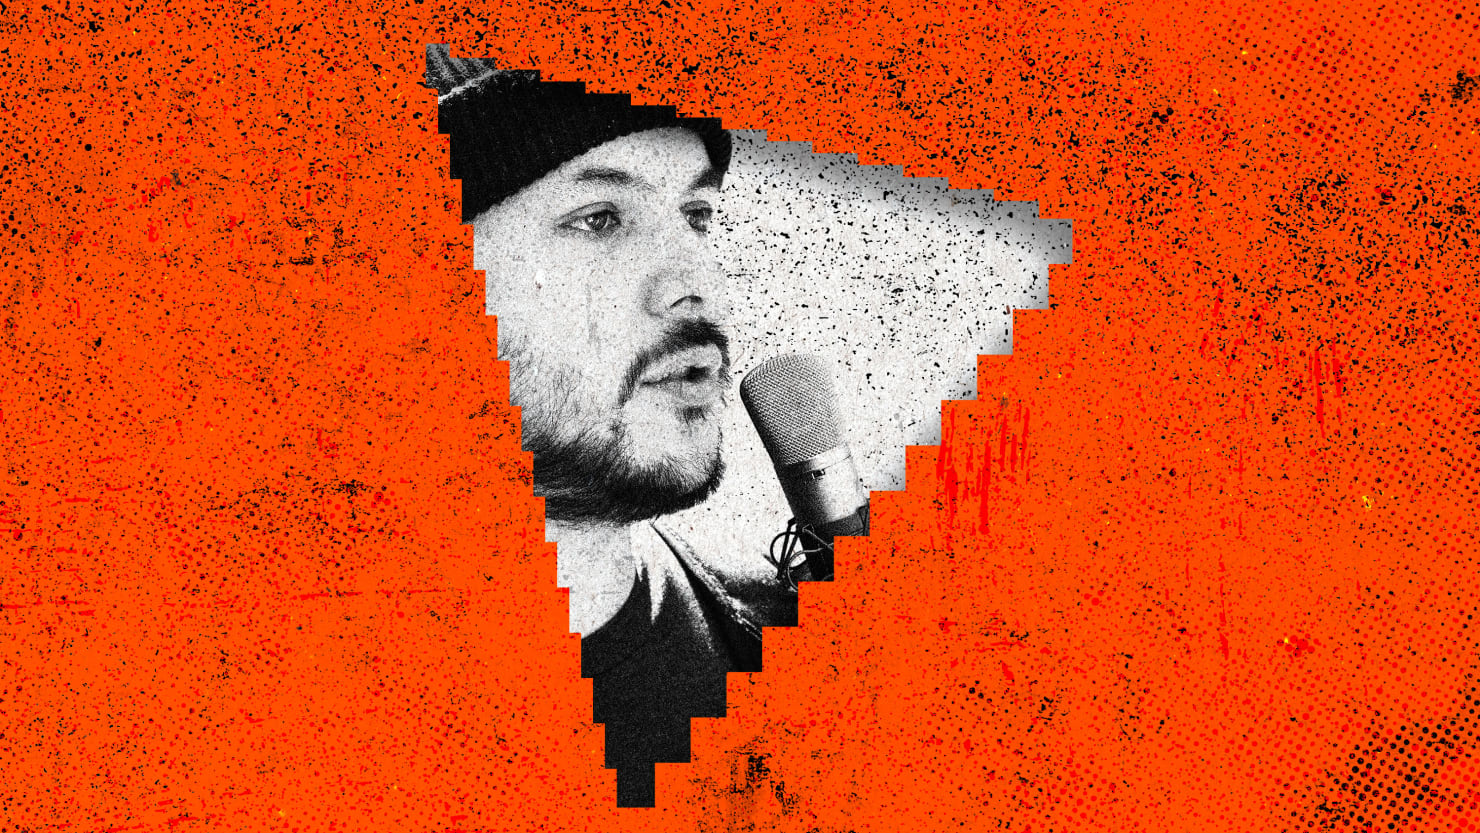 A former darling of Occupy Wall Street, Tim Pool has racked up more than a billion views and millions in earnings while dangerously whitewashing the f